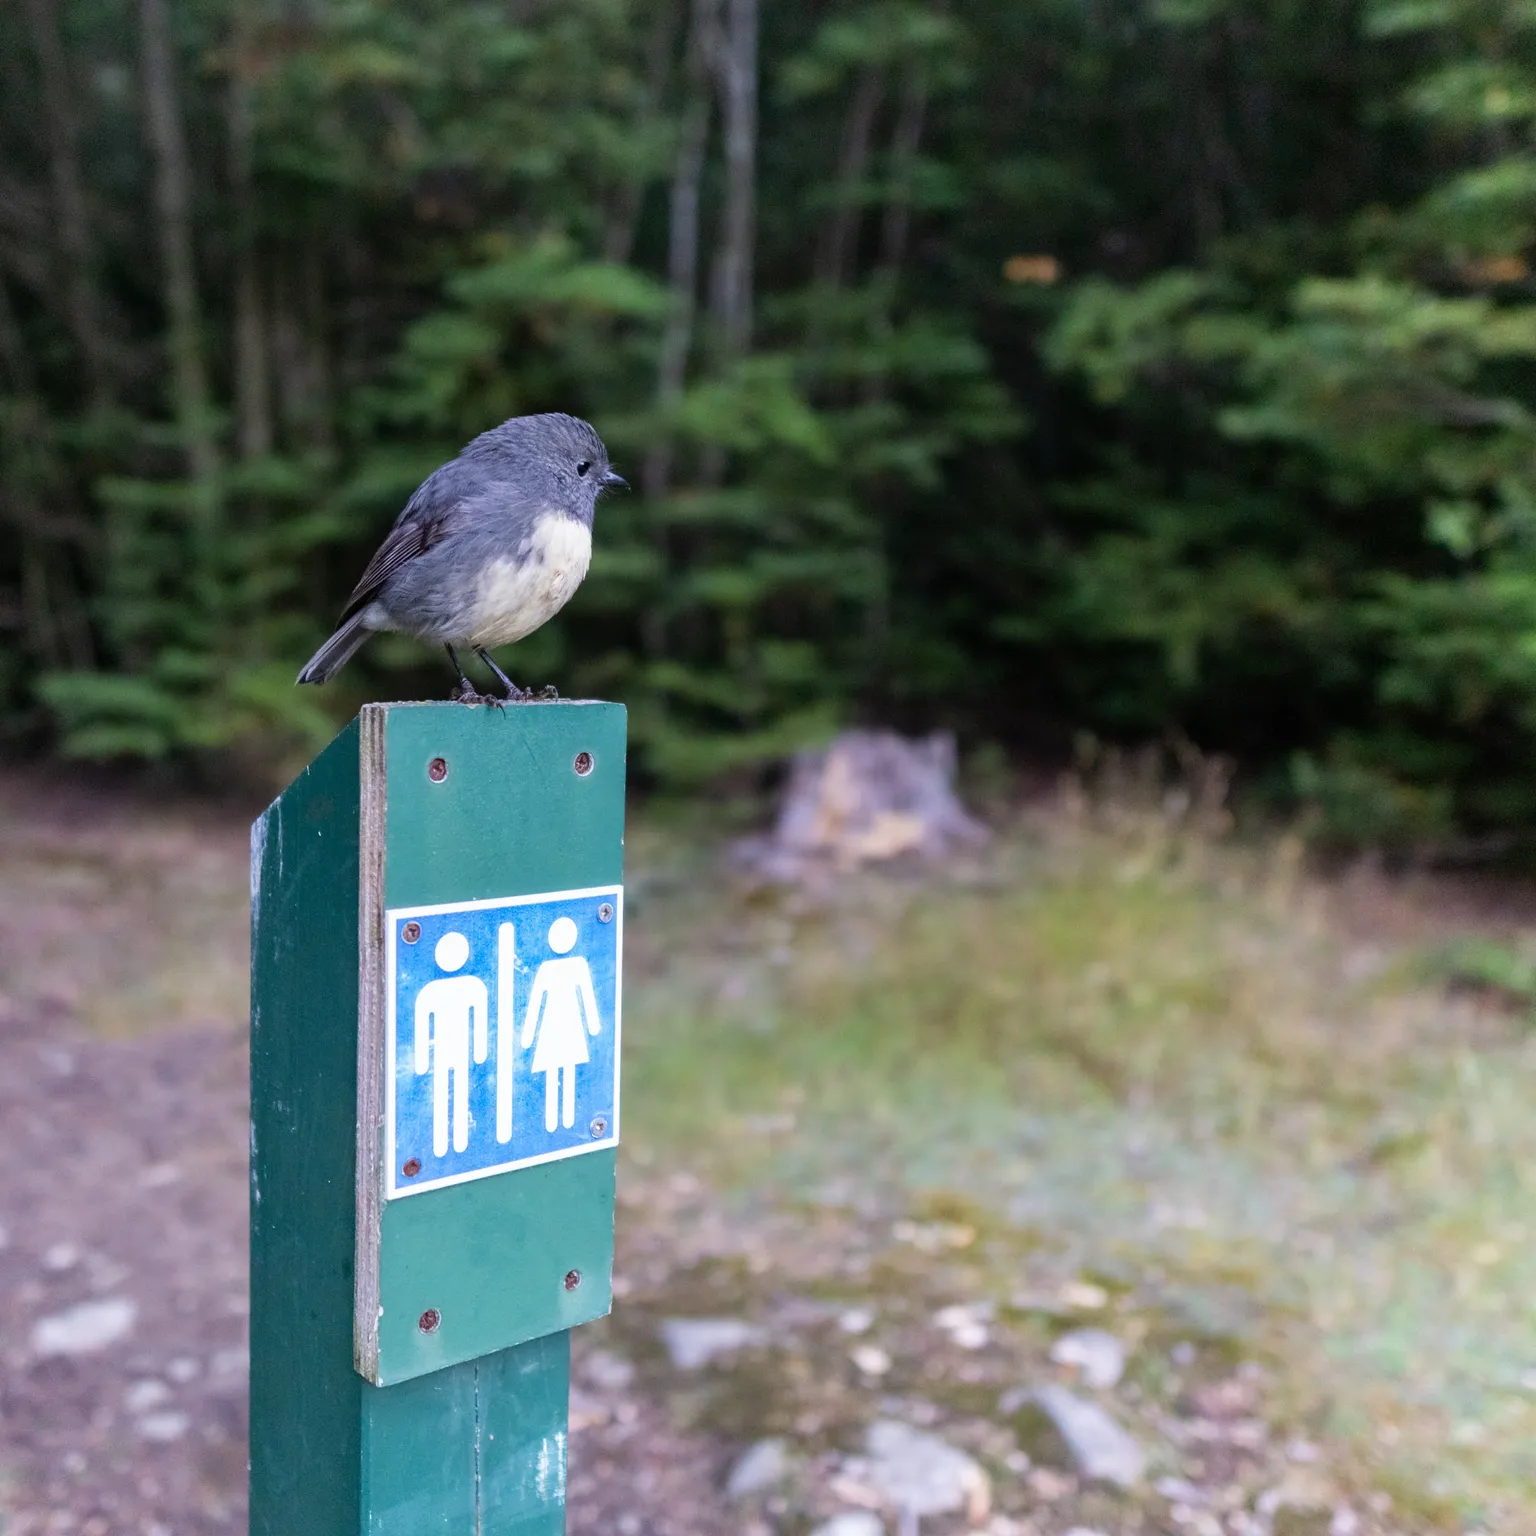 I only had my landscape lens with me for this trip but robins are so tame that it served adequately for bird photography. This particular individual was quite fascinated with the toilet marker.